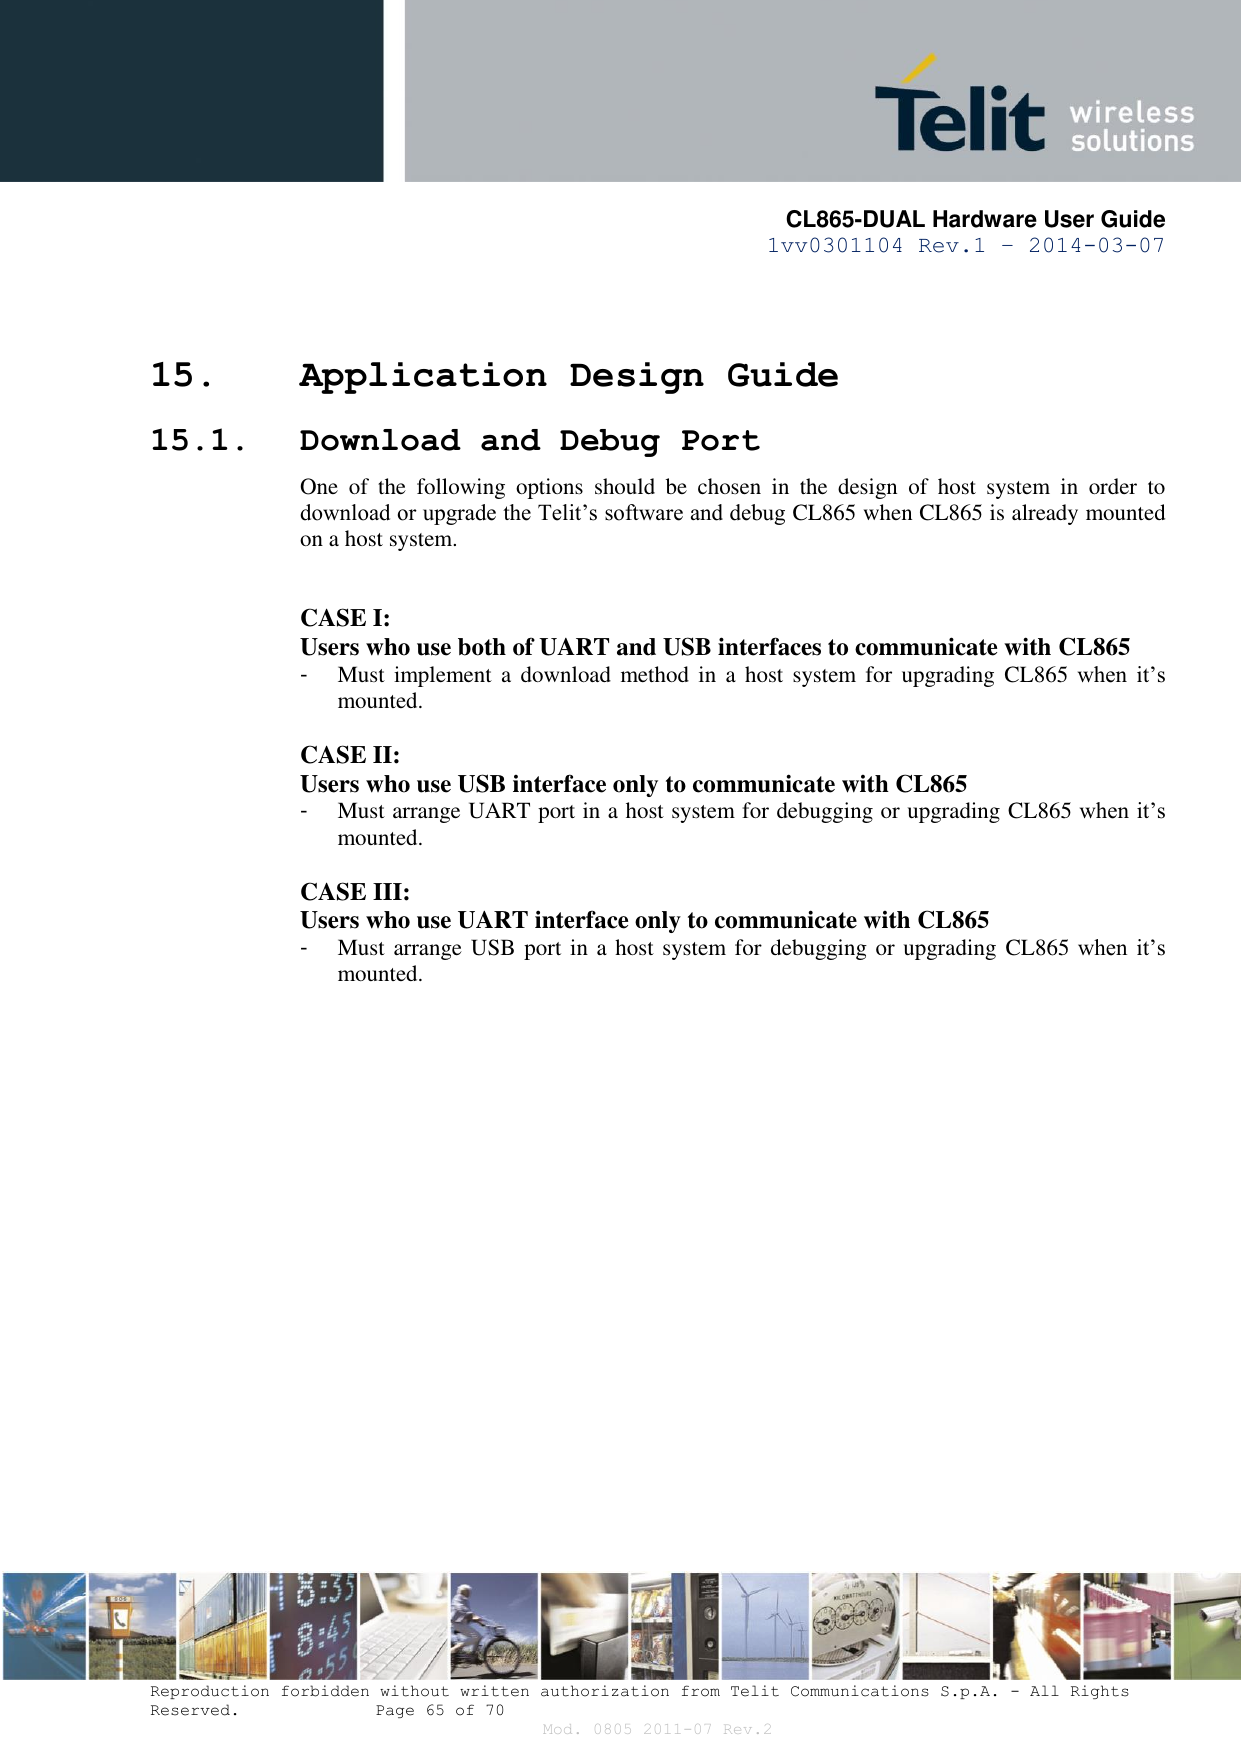       CL865-DUAL Hardware User Guide 1vv0301104 Rev.1 – 2014-03-07  Reproduction forbidden without written authorization from Telit Communications S.p.A. - All Rights Reserved.    Page 65 of 70 Mod. 0805 2011-07 Rev.2 15. Application Design Guide 15.1. Download and Debug Port One  of  the  following  options  should  be  chosen  in  the  design  of  host  system  in  order  to download or upgrade the Telit’s software and debug CL865 when CL865 is already mounted on a host system.  CASE I: Users who use both of UART and USB interfaces to communicate with CL865 -  Must implement a  download method  in a  host  system for  upgrading  CL865  when  it’s mounted.  CASE II: Users who use USB interface only to communicate with CL865 -  Must arrange UART port in a host system for debugging or upgrading CL865 when it’s mounted.  CASE III: Users who use UART interface only to communicate with CL865 -  Must arrange USB port in a host system for debugging or upgrading  CL865 when  it’s mounted.  